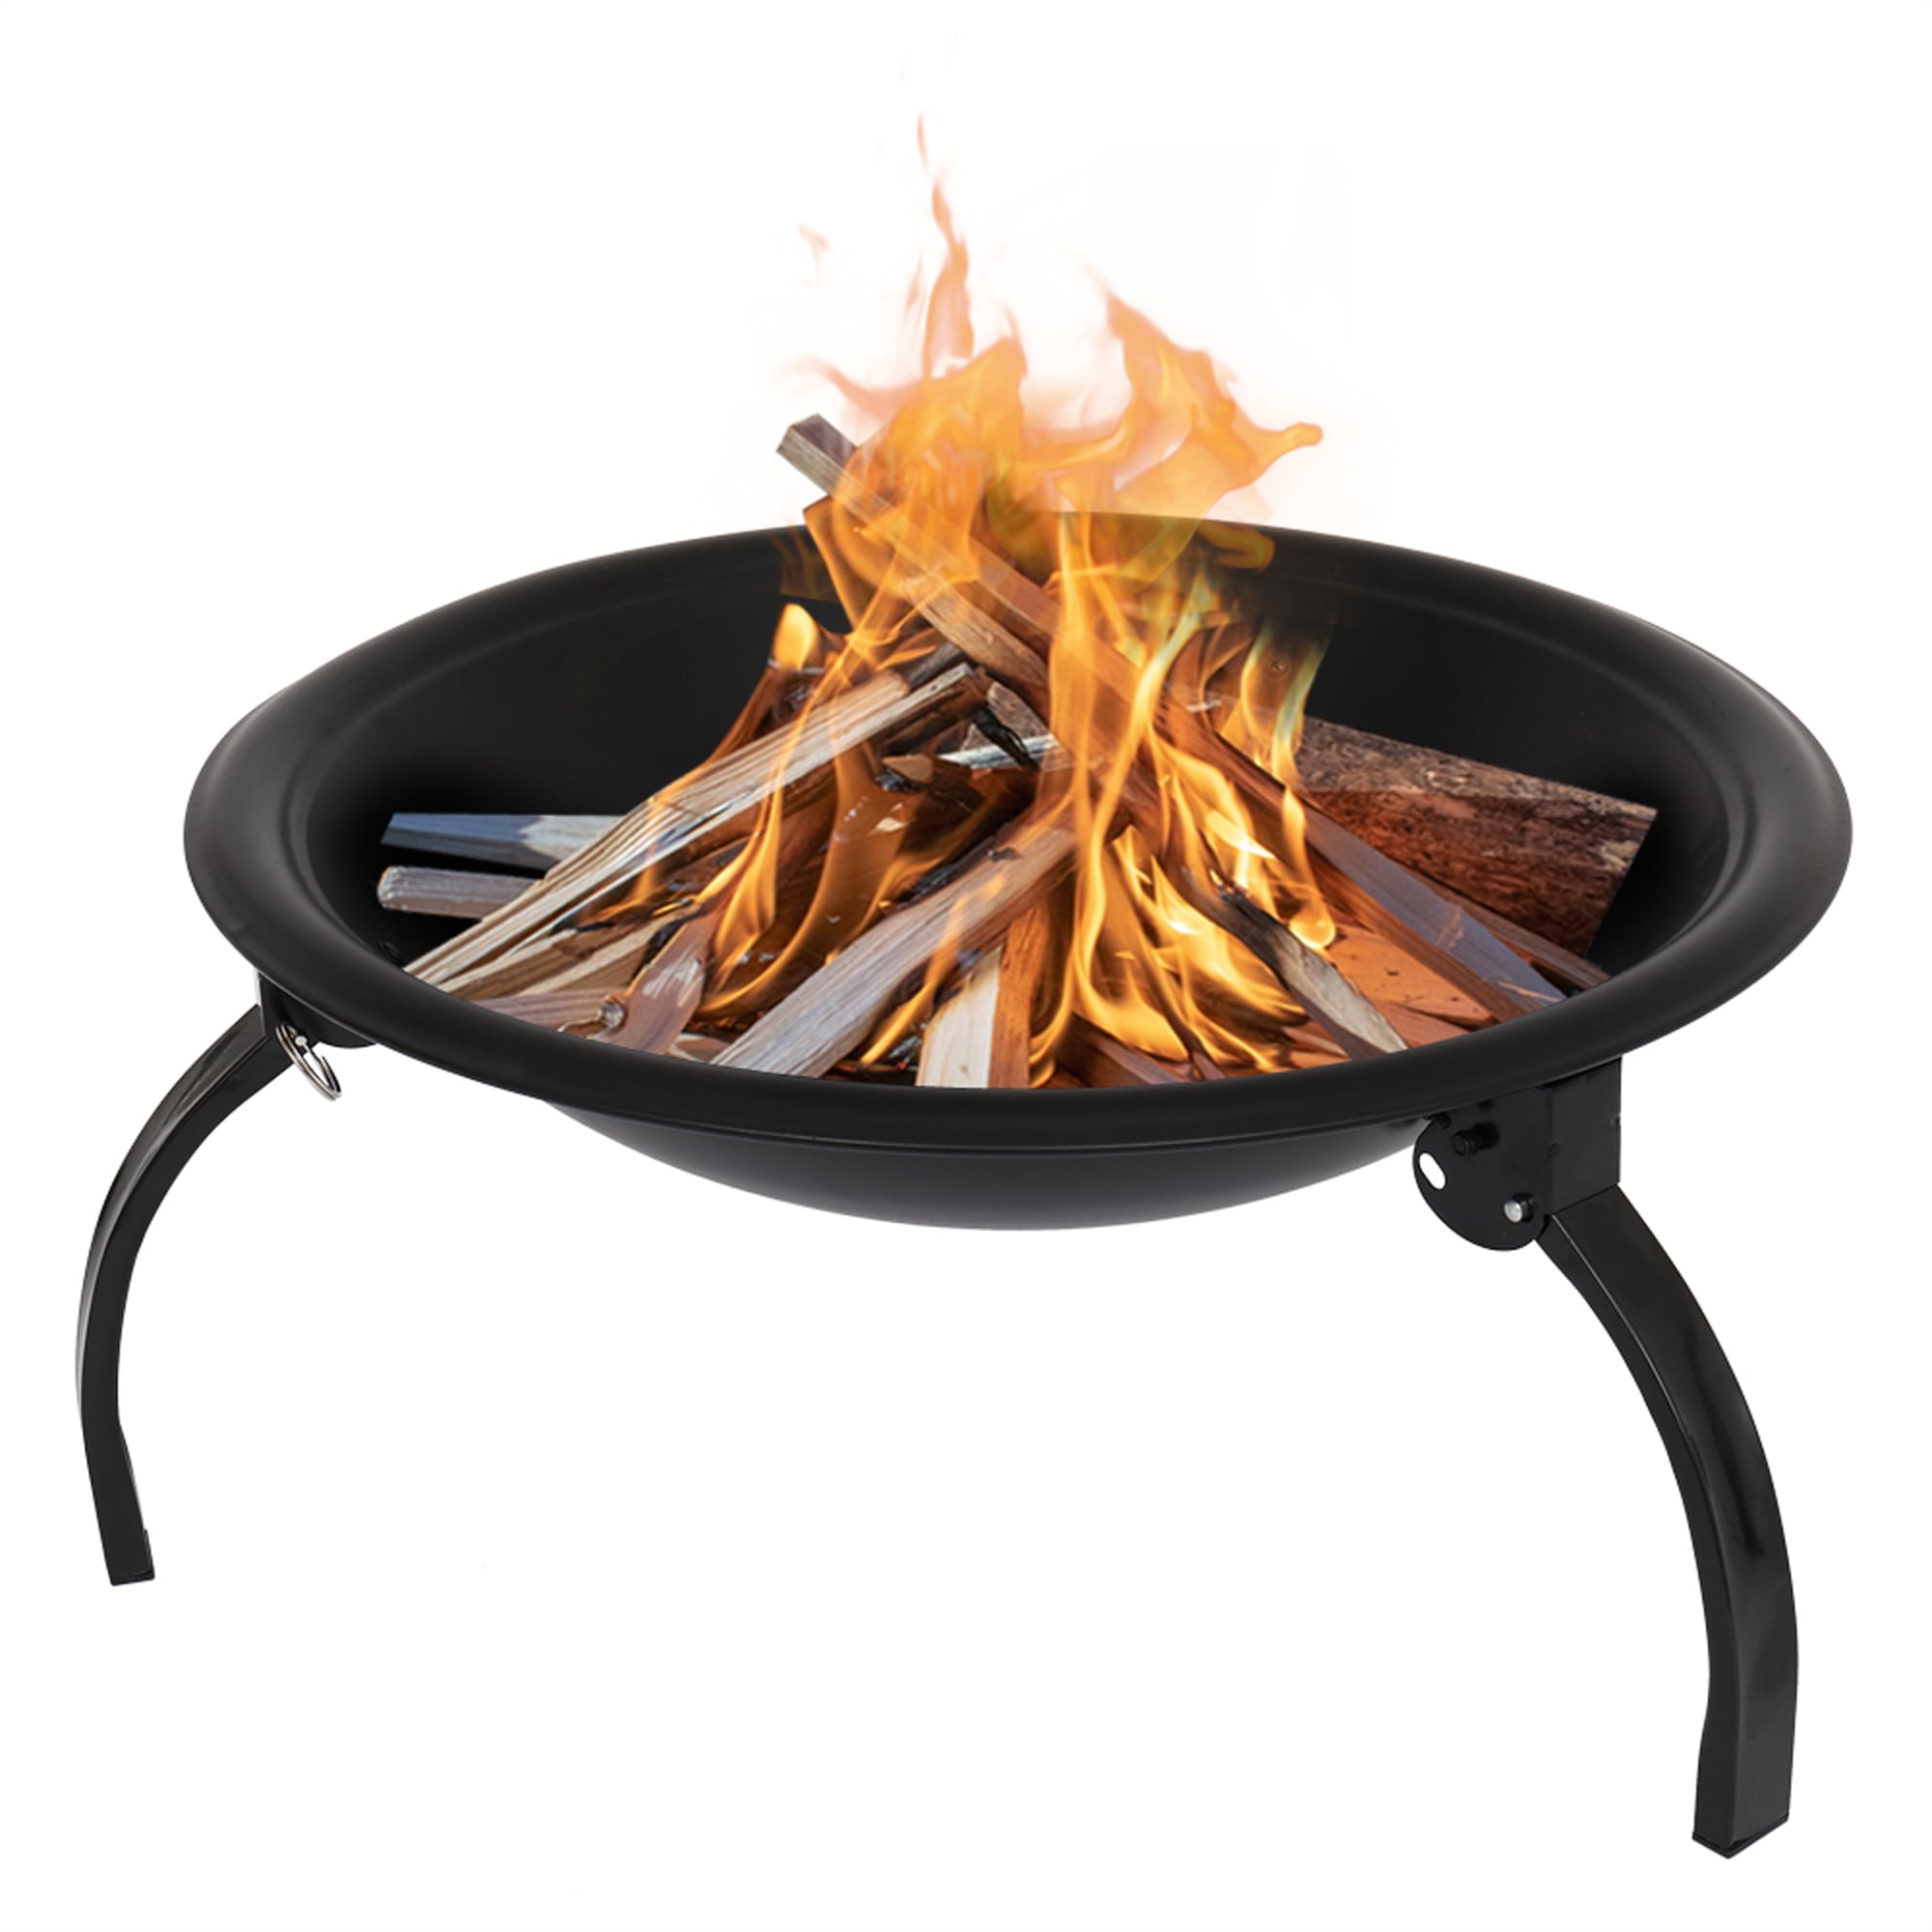 21 Inch Grill Fire Pit Outdoor Wood, Raised Fire Pit Camping